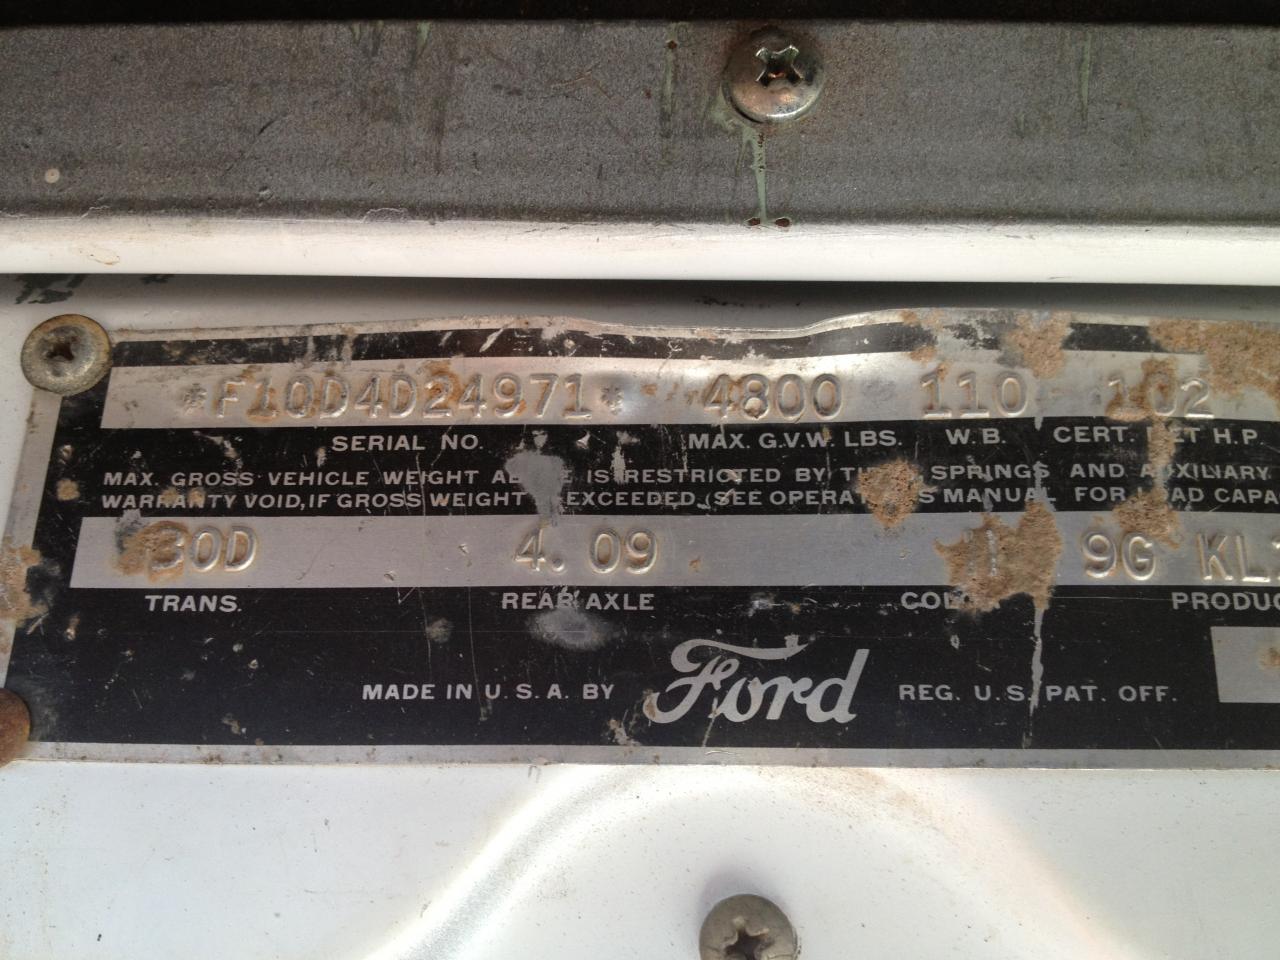 1954 Ford serial number #4